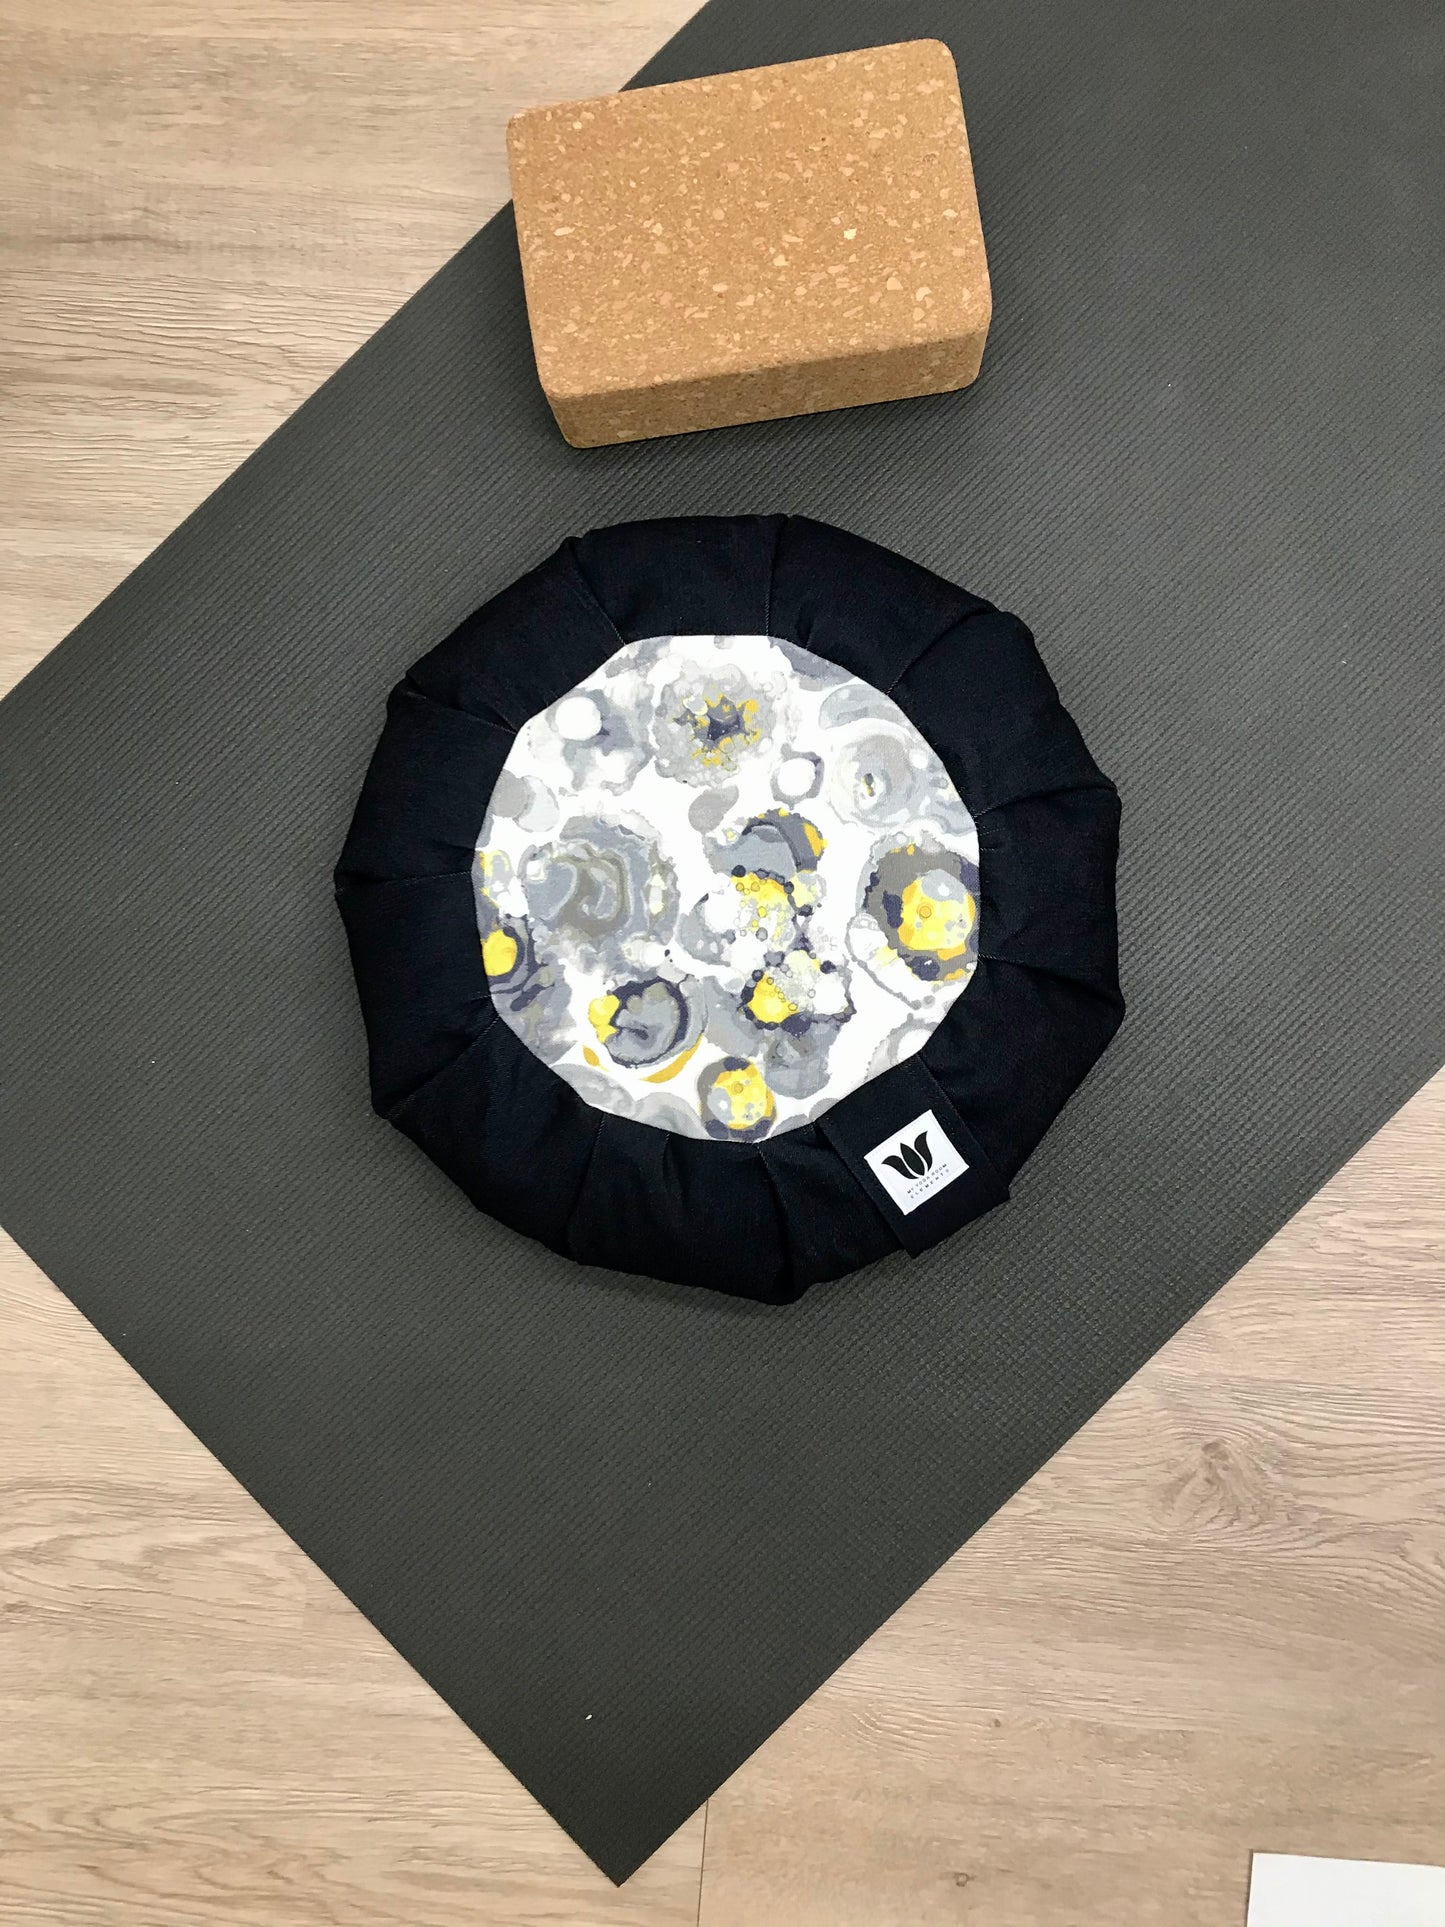 Handcrafted premium cotton denim meditation seat cushion in solid navy blue, grey-blue and yellow watercolor print center. Align the spine and body in comfort to calm the monkey mind in your meditation practice. Handcrafted in Calgary, Alberta Canada